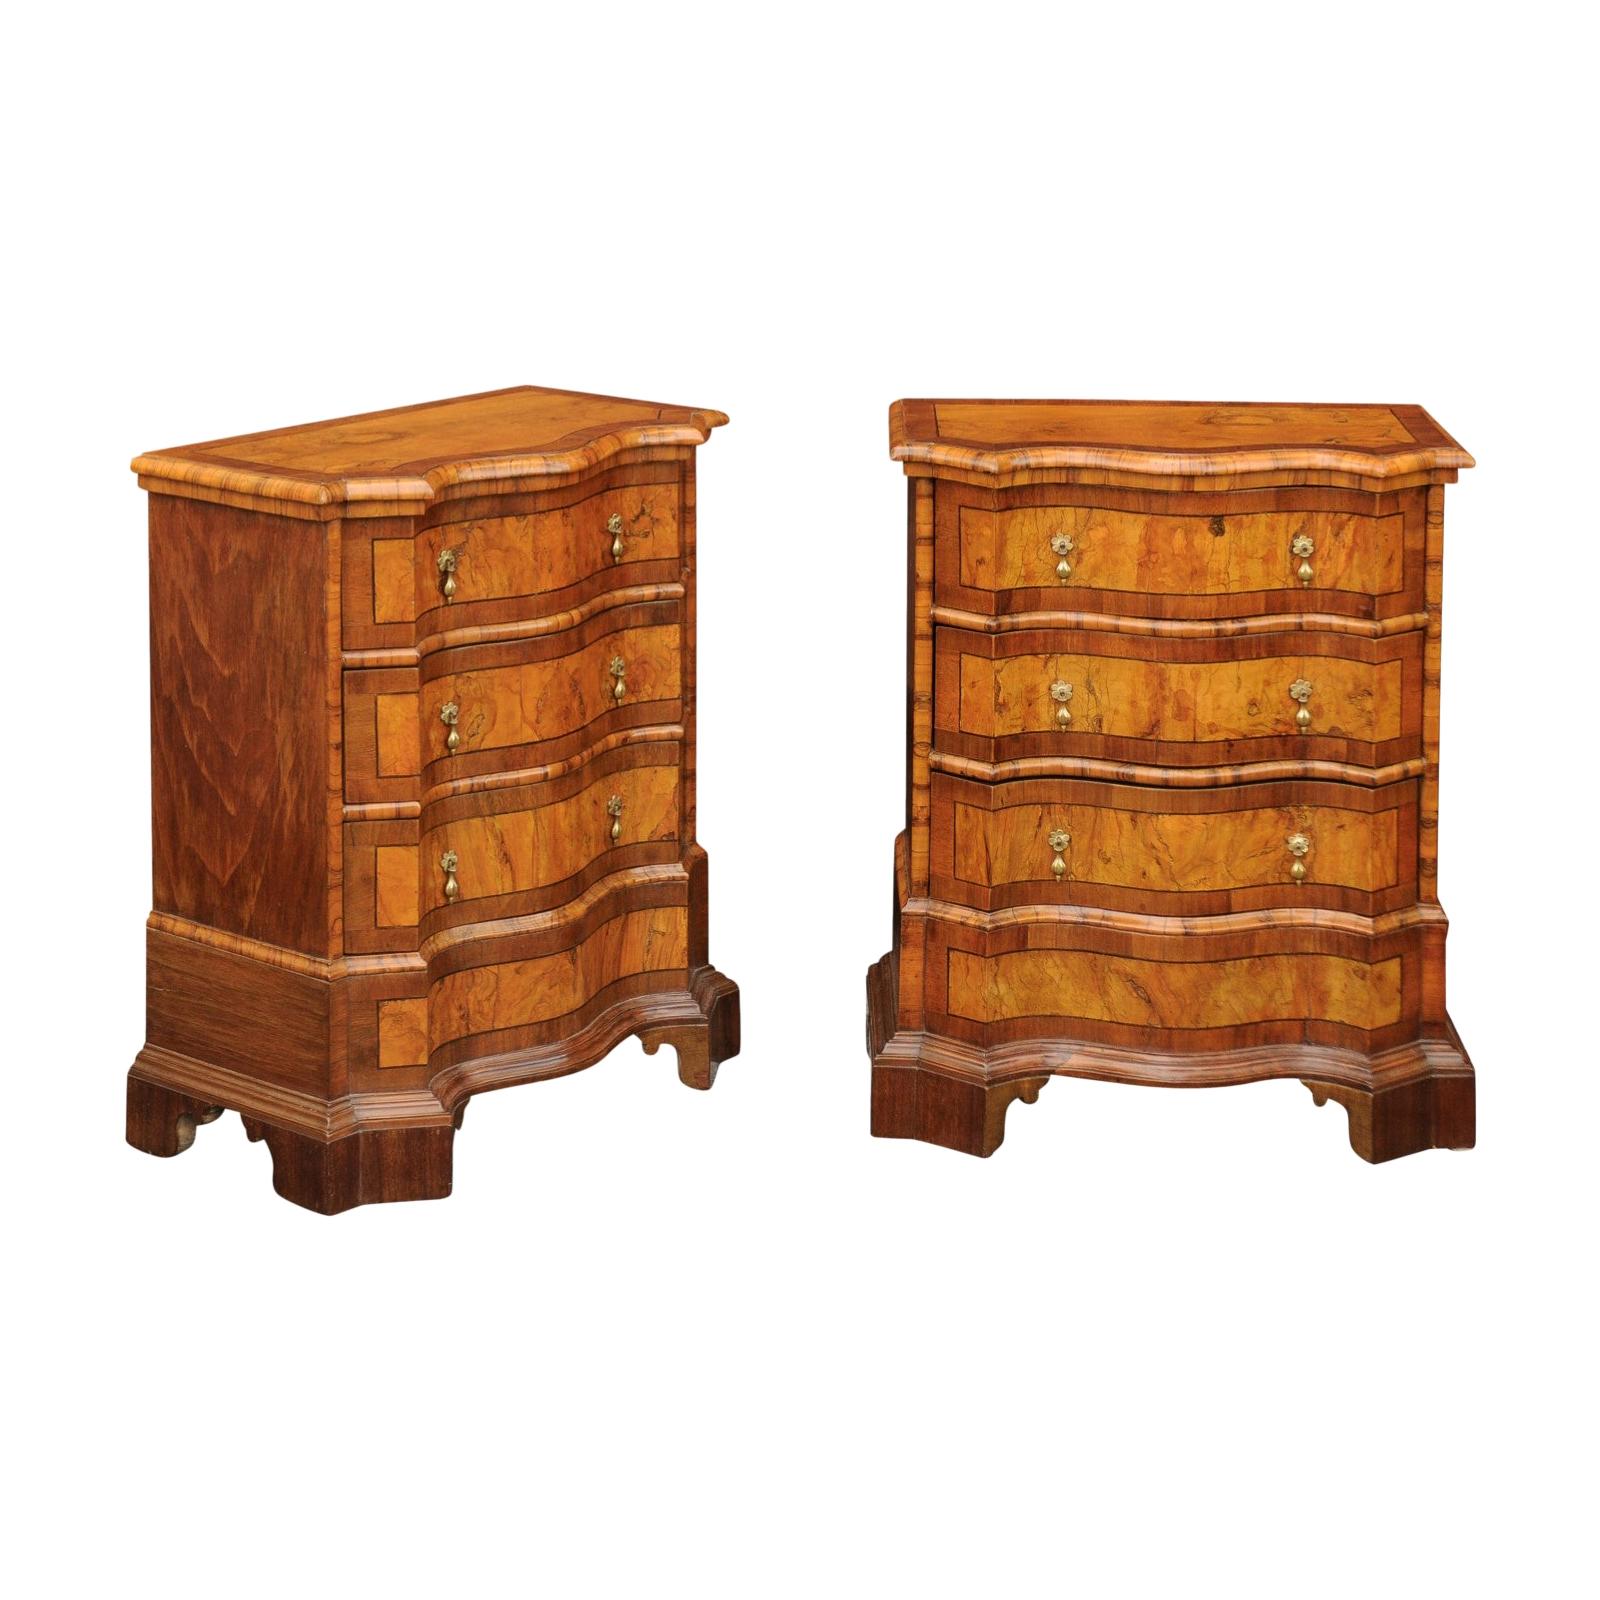 Pair of Italian Burl Walnut Bedside Commodes with Serpentine Front, circa 1890